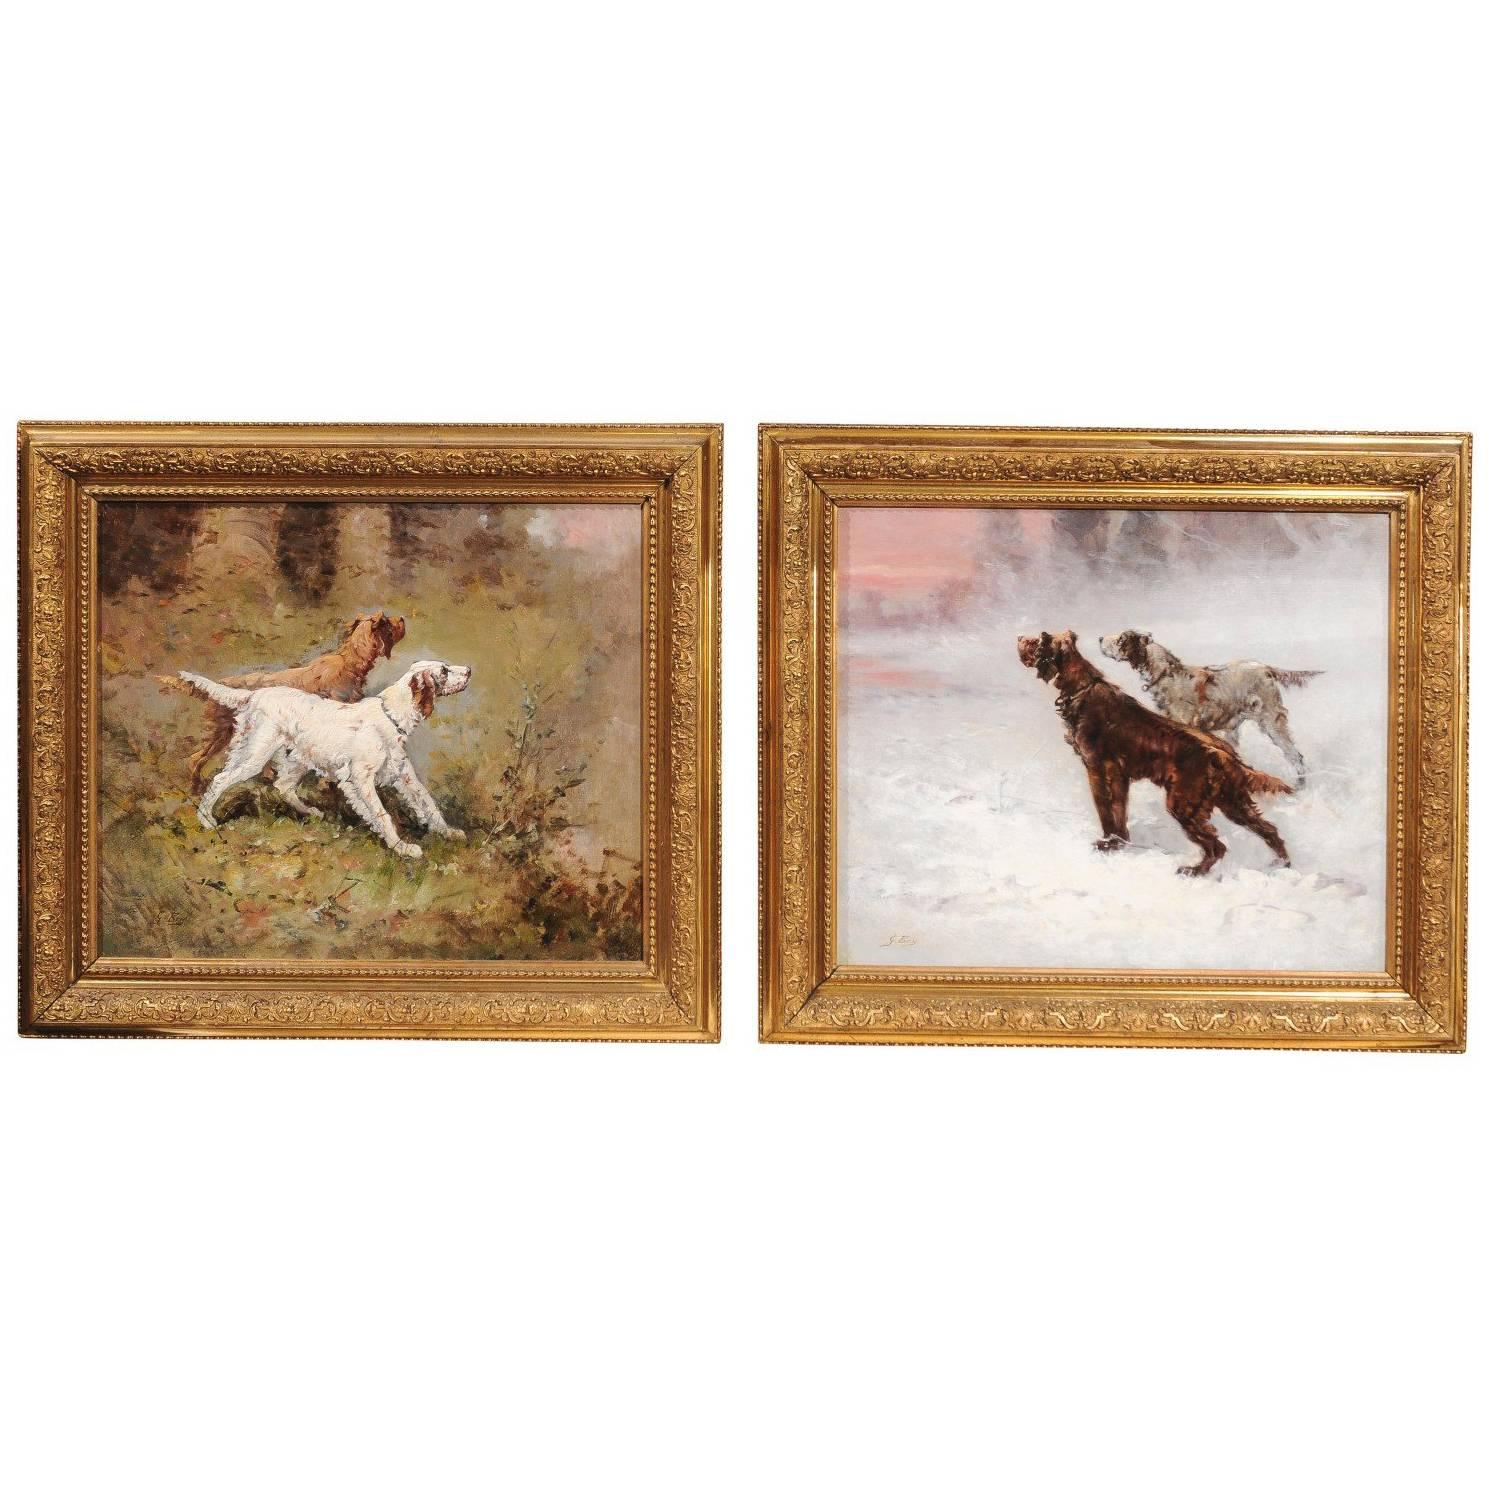 Pair of French Early 20th Century Oil Paintings of Sporting Dogs by G. Ben